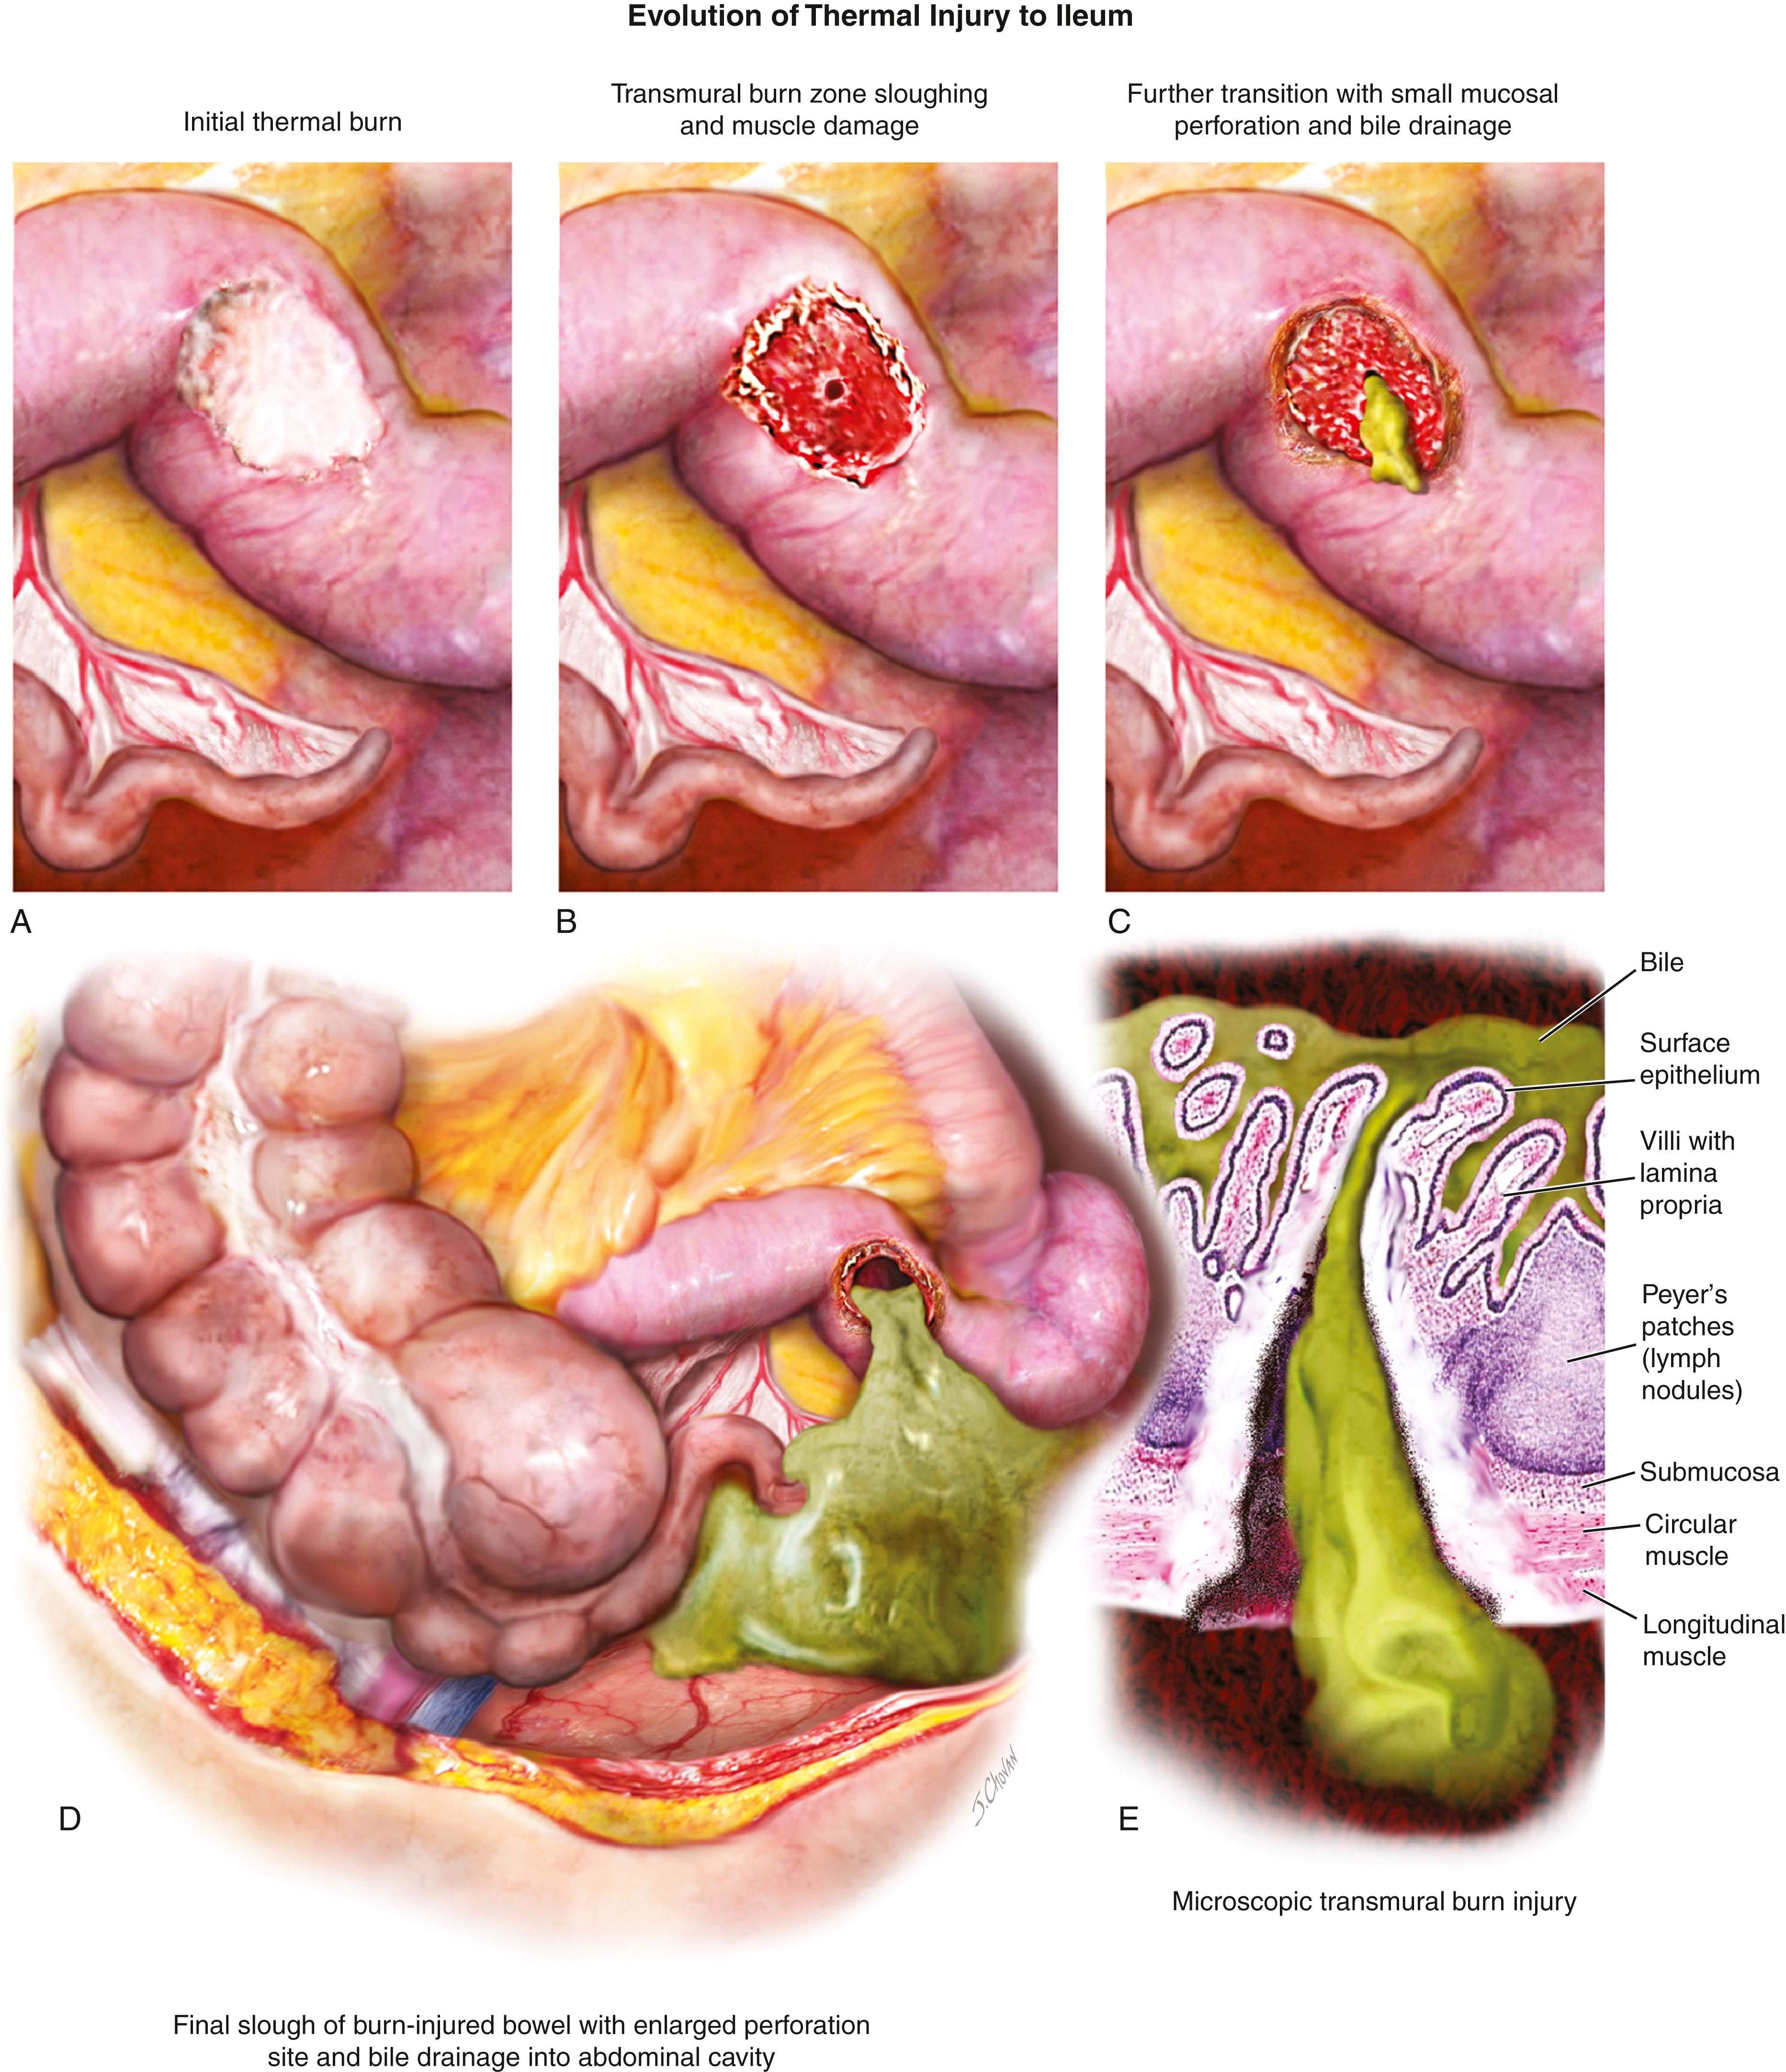 FIG. 119.4, A. A thermal injury creates a white blanching wound of the ileum. B. Within 24 to 36 hours the burn eschar has sloughed, exposing a transmural injury and a tiny perforation. C. As time passes, bile-stained fluid seeps from the perforation. D. The initial wound sloughs secondary to burn-induced necrosis. E. Microscopic section showing the mature transmural perforation.